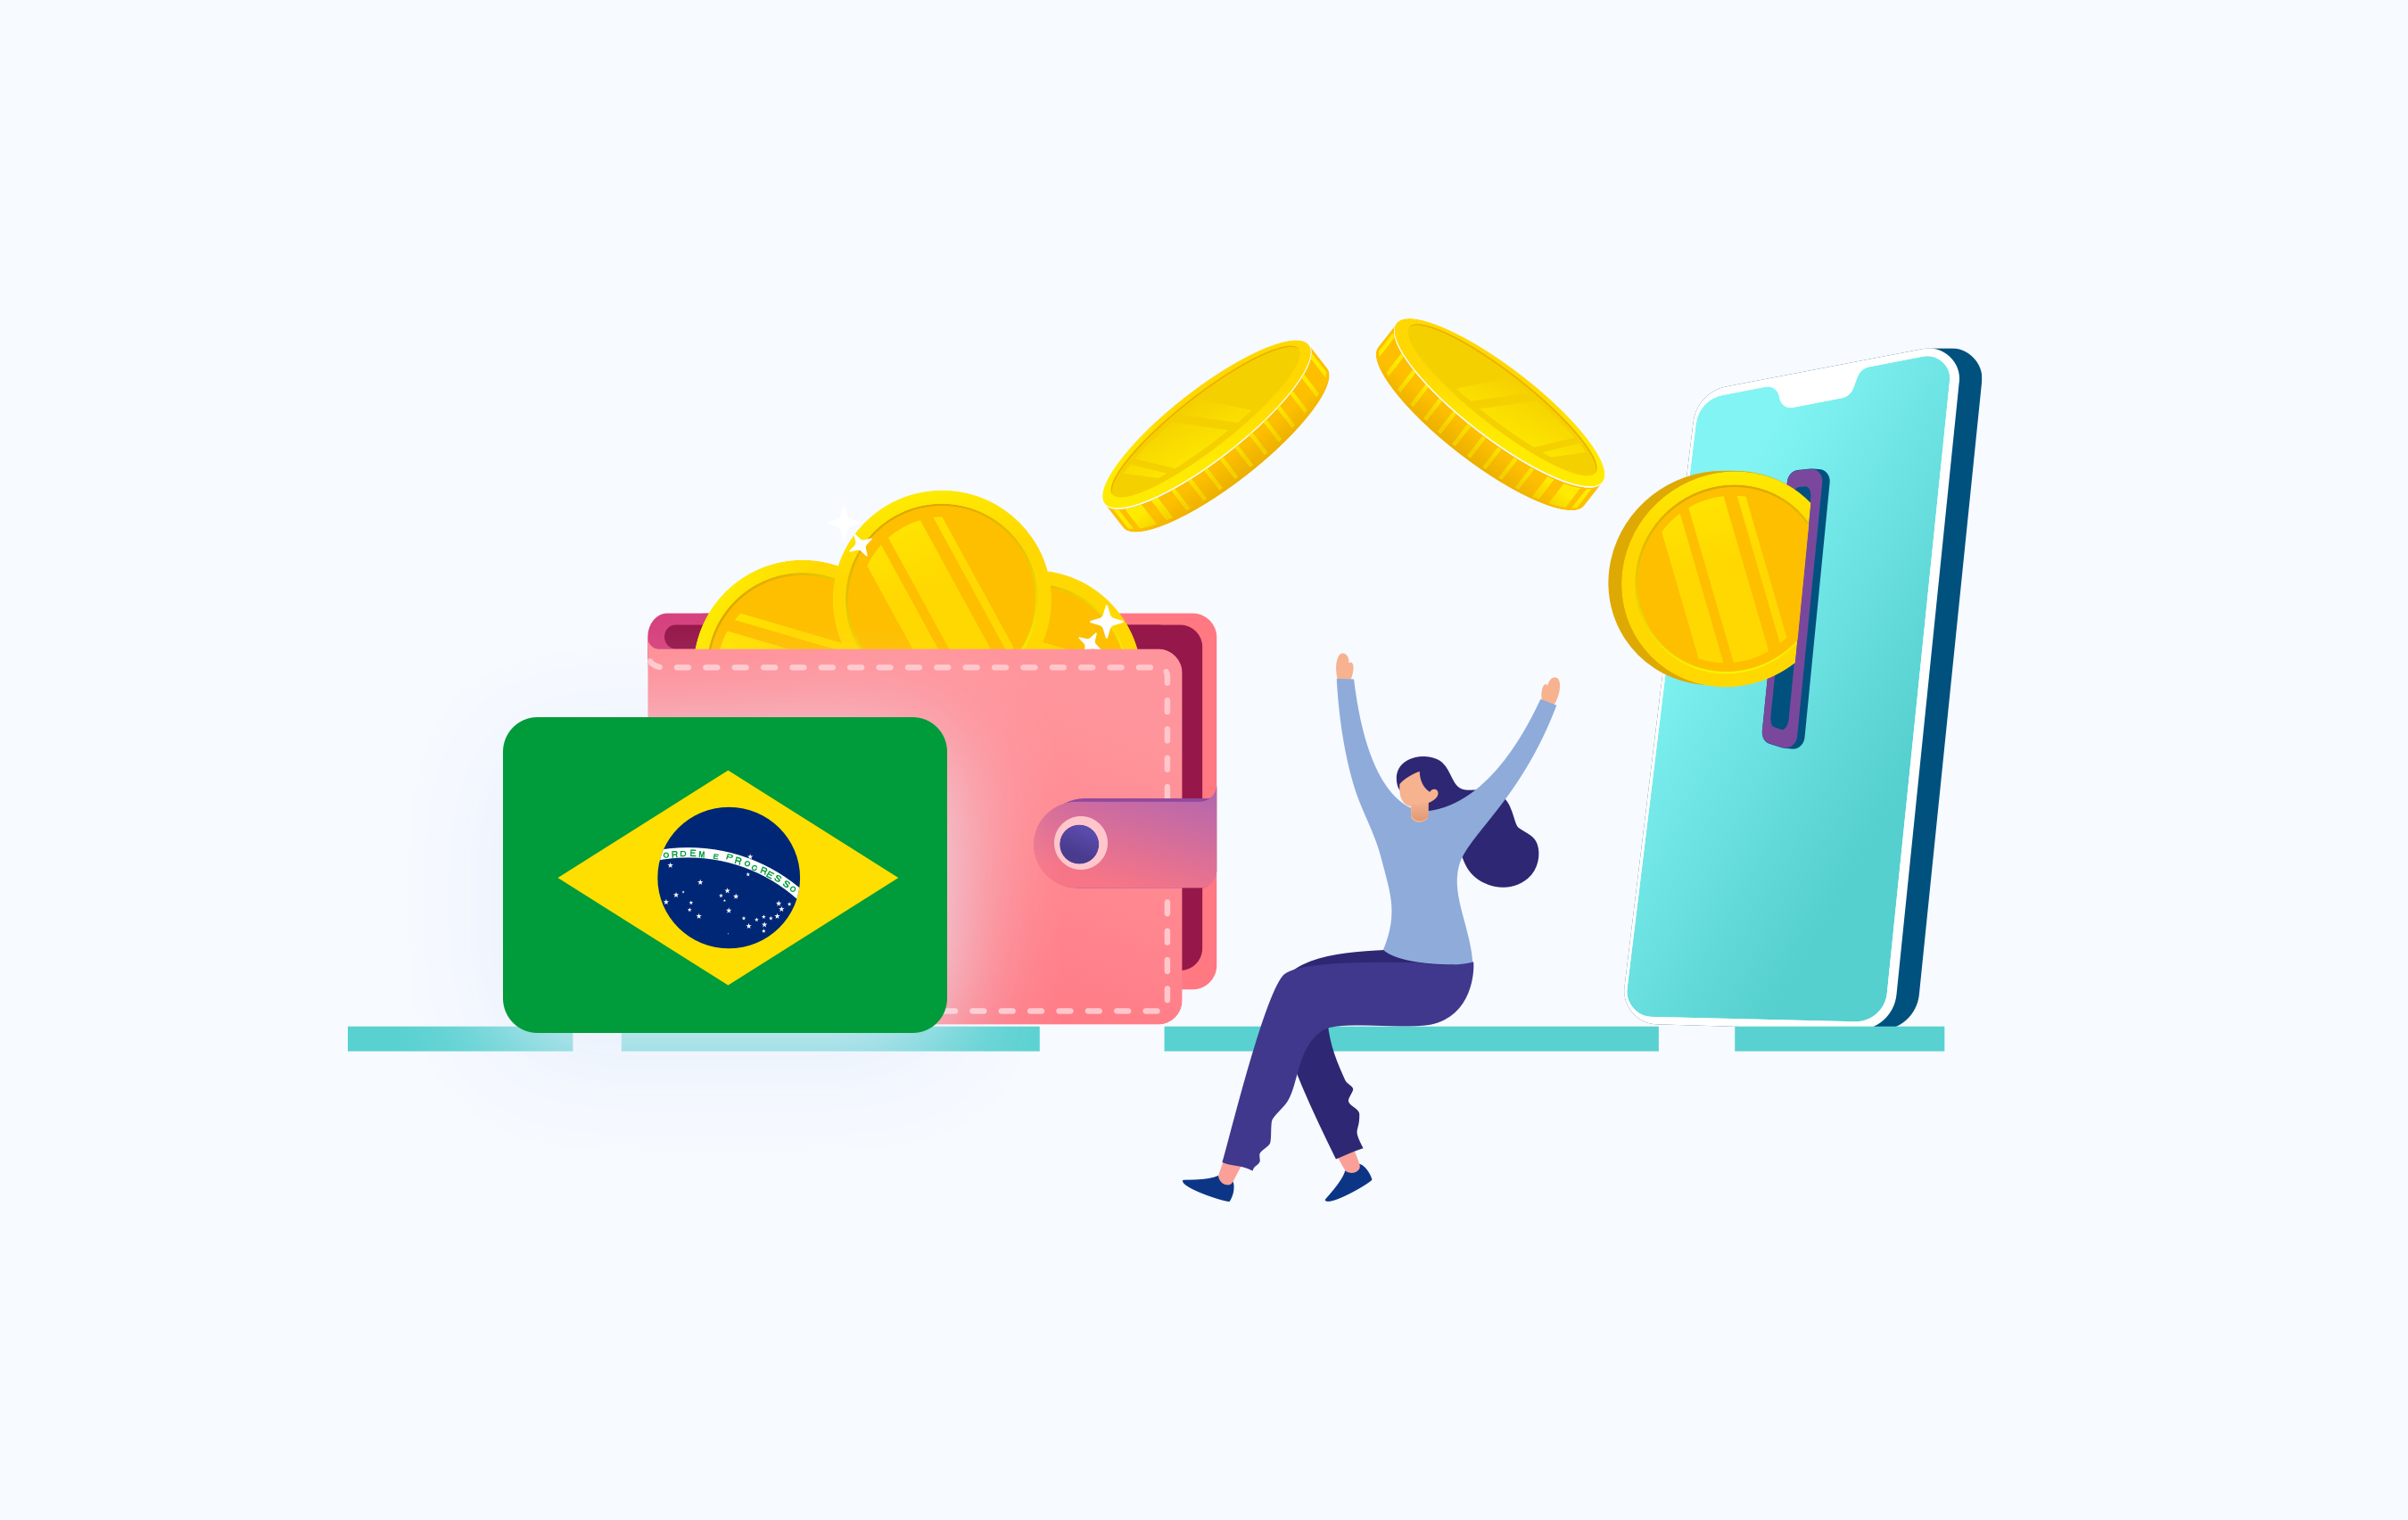 How to receive money in Brazil